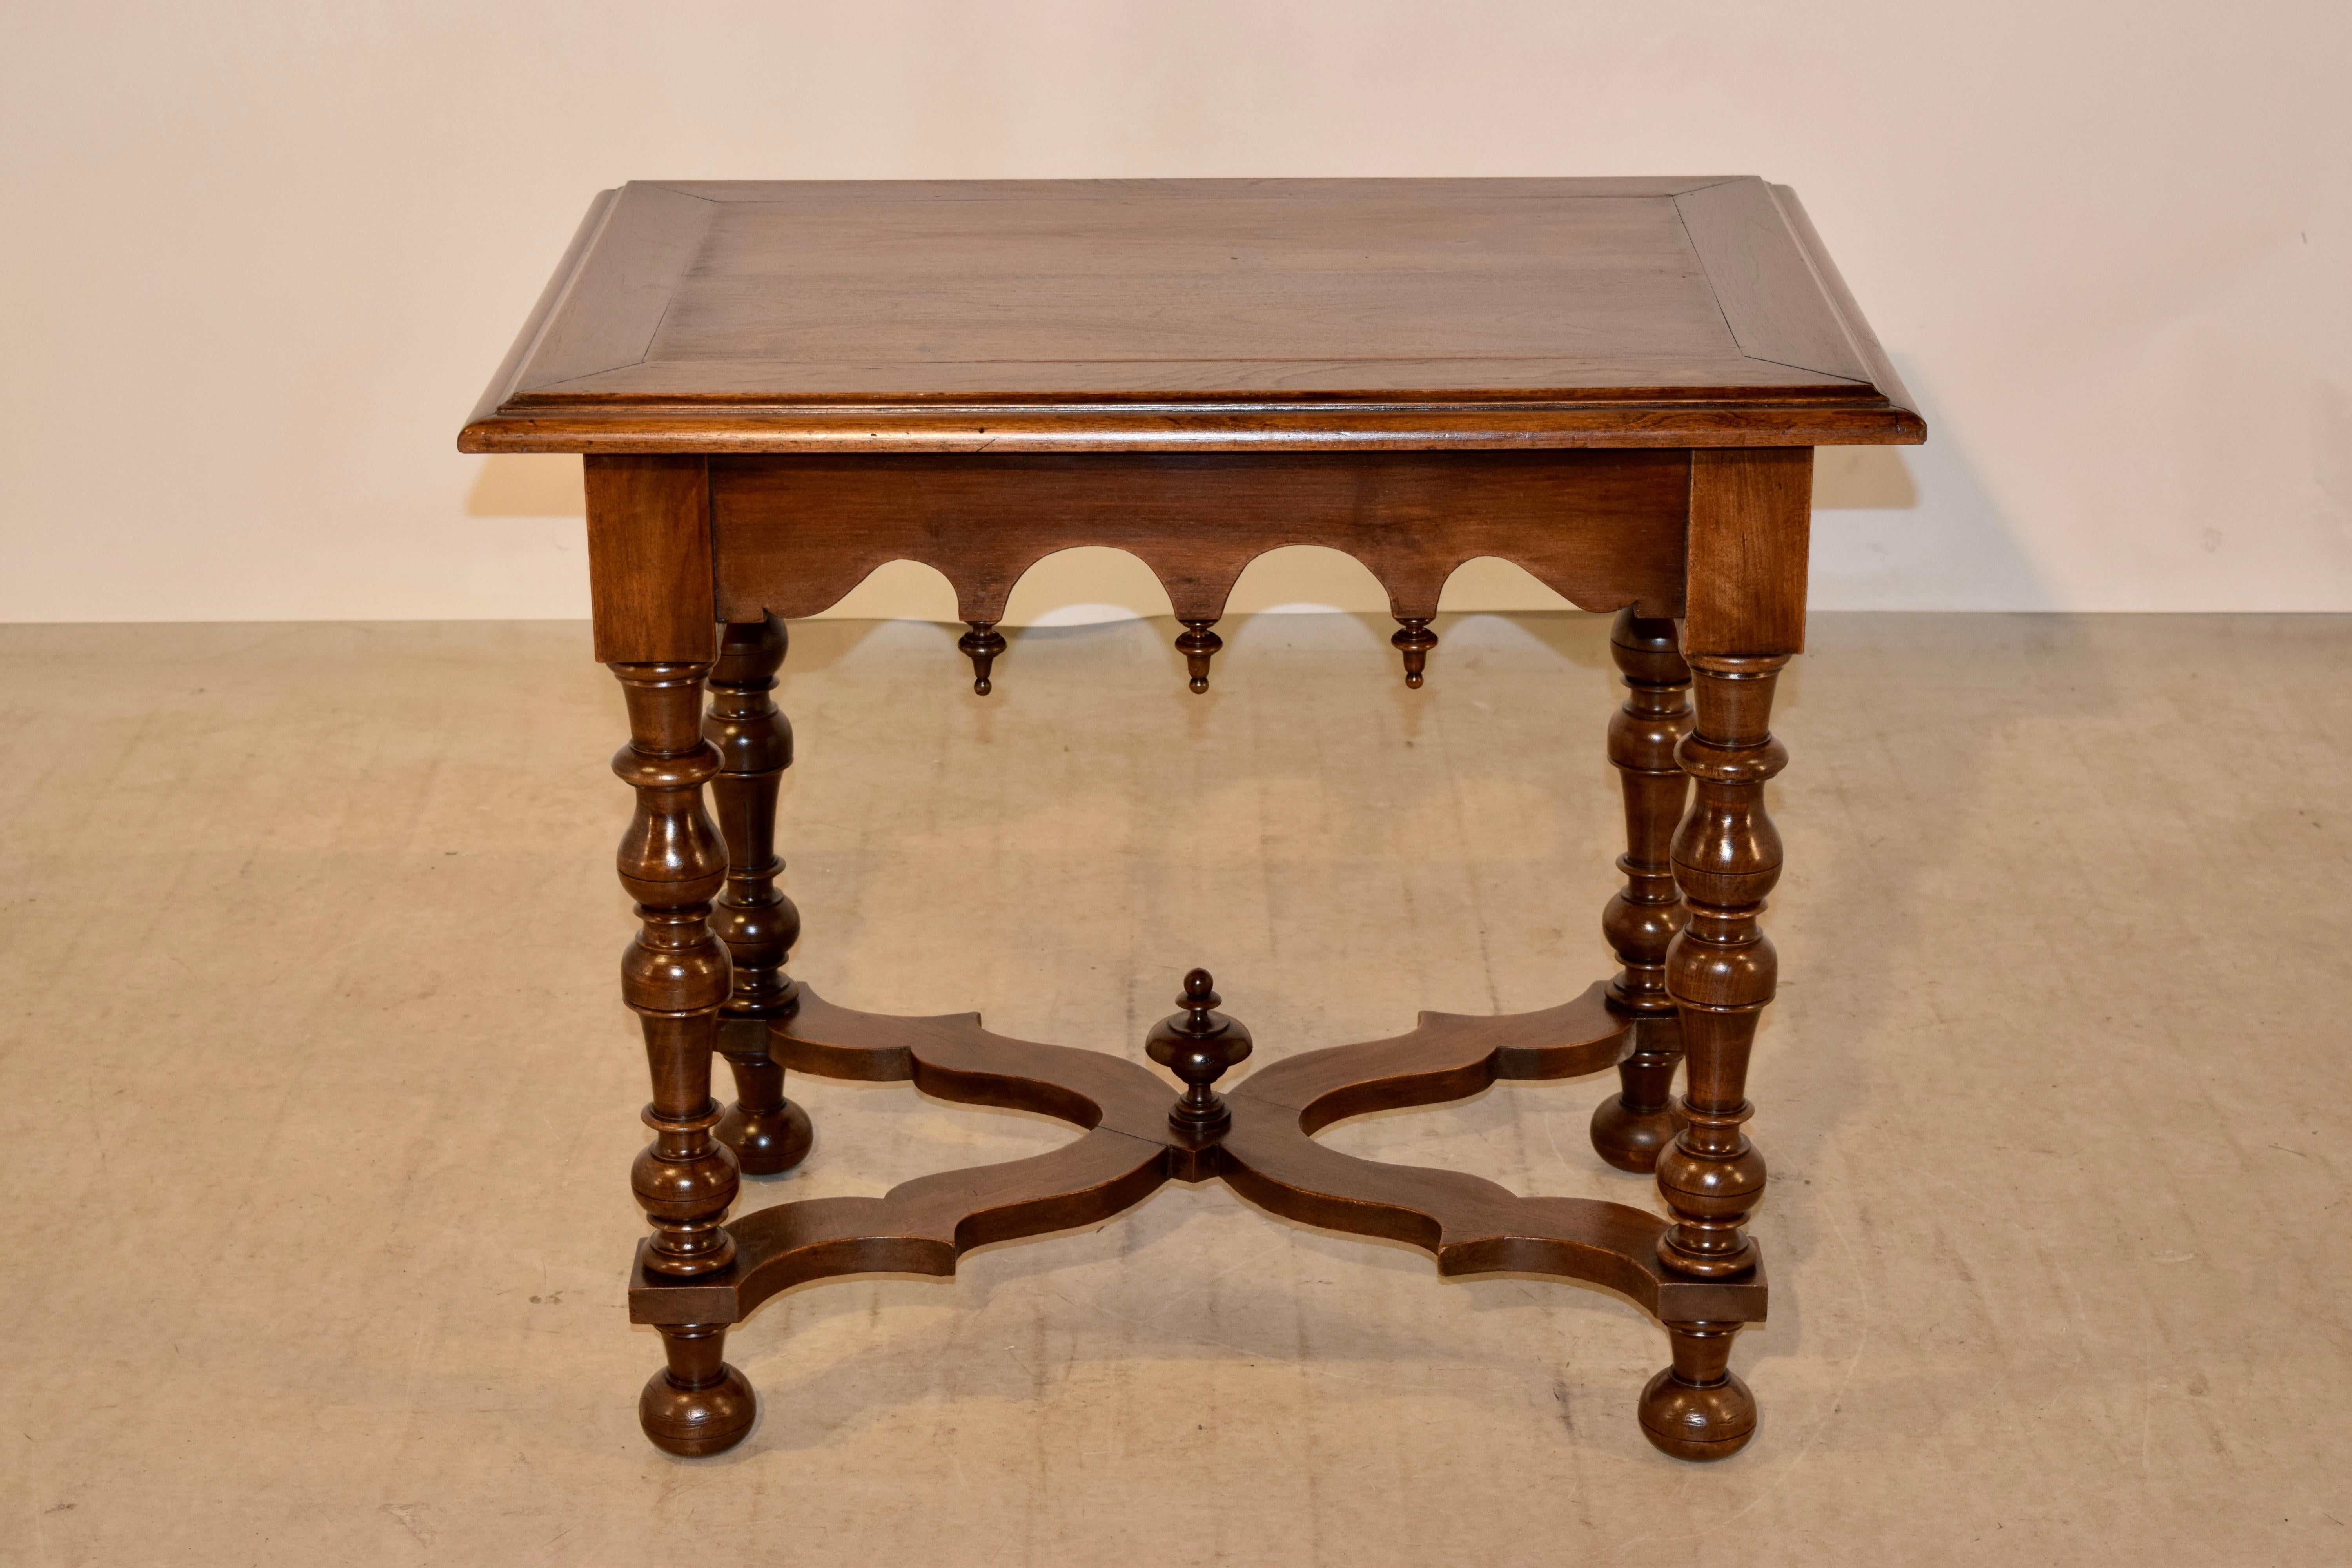 19th century walnut side table from France with a banded top which has a molded and beveled edge as well, following down to a scalloped apron with hand-turned finial decorations. The legs are hand-turned and are joined by a hand scalloped stretcher,